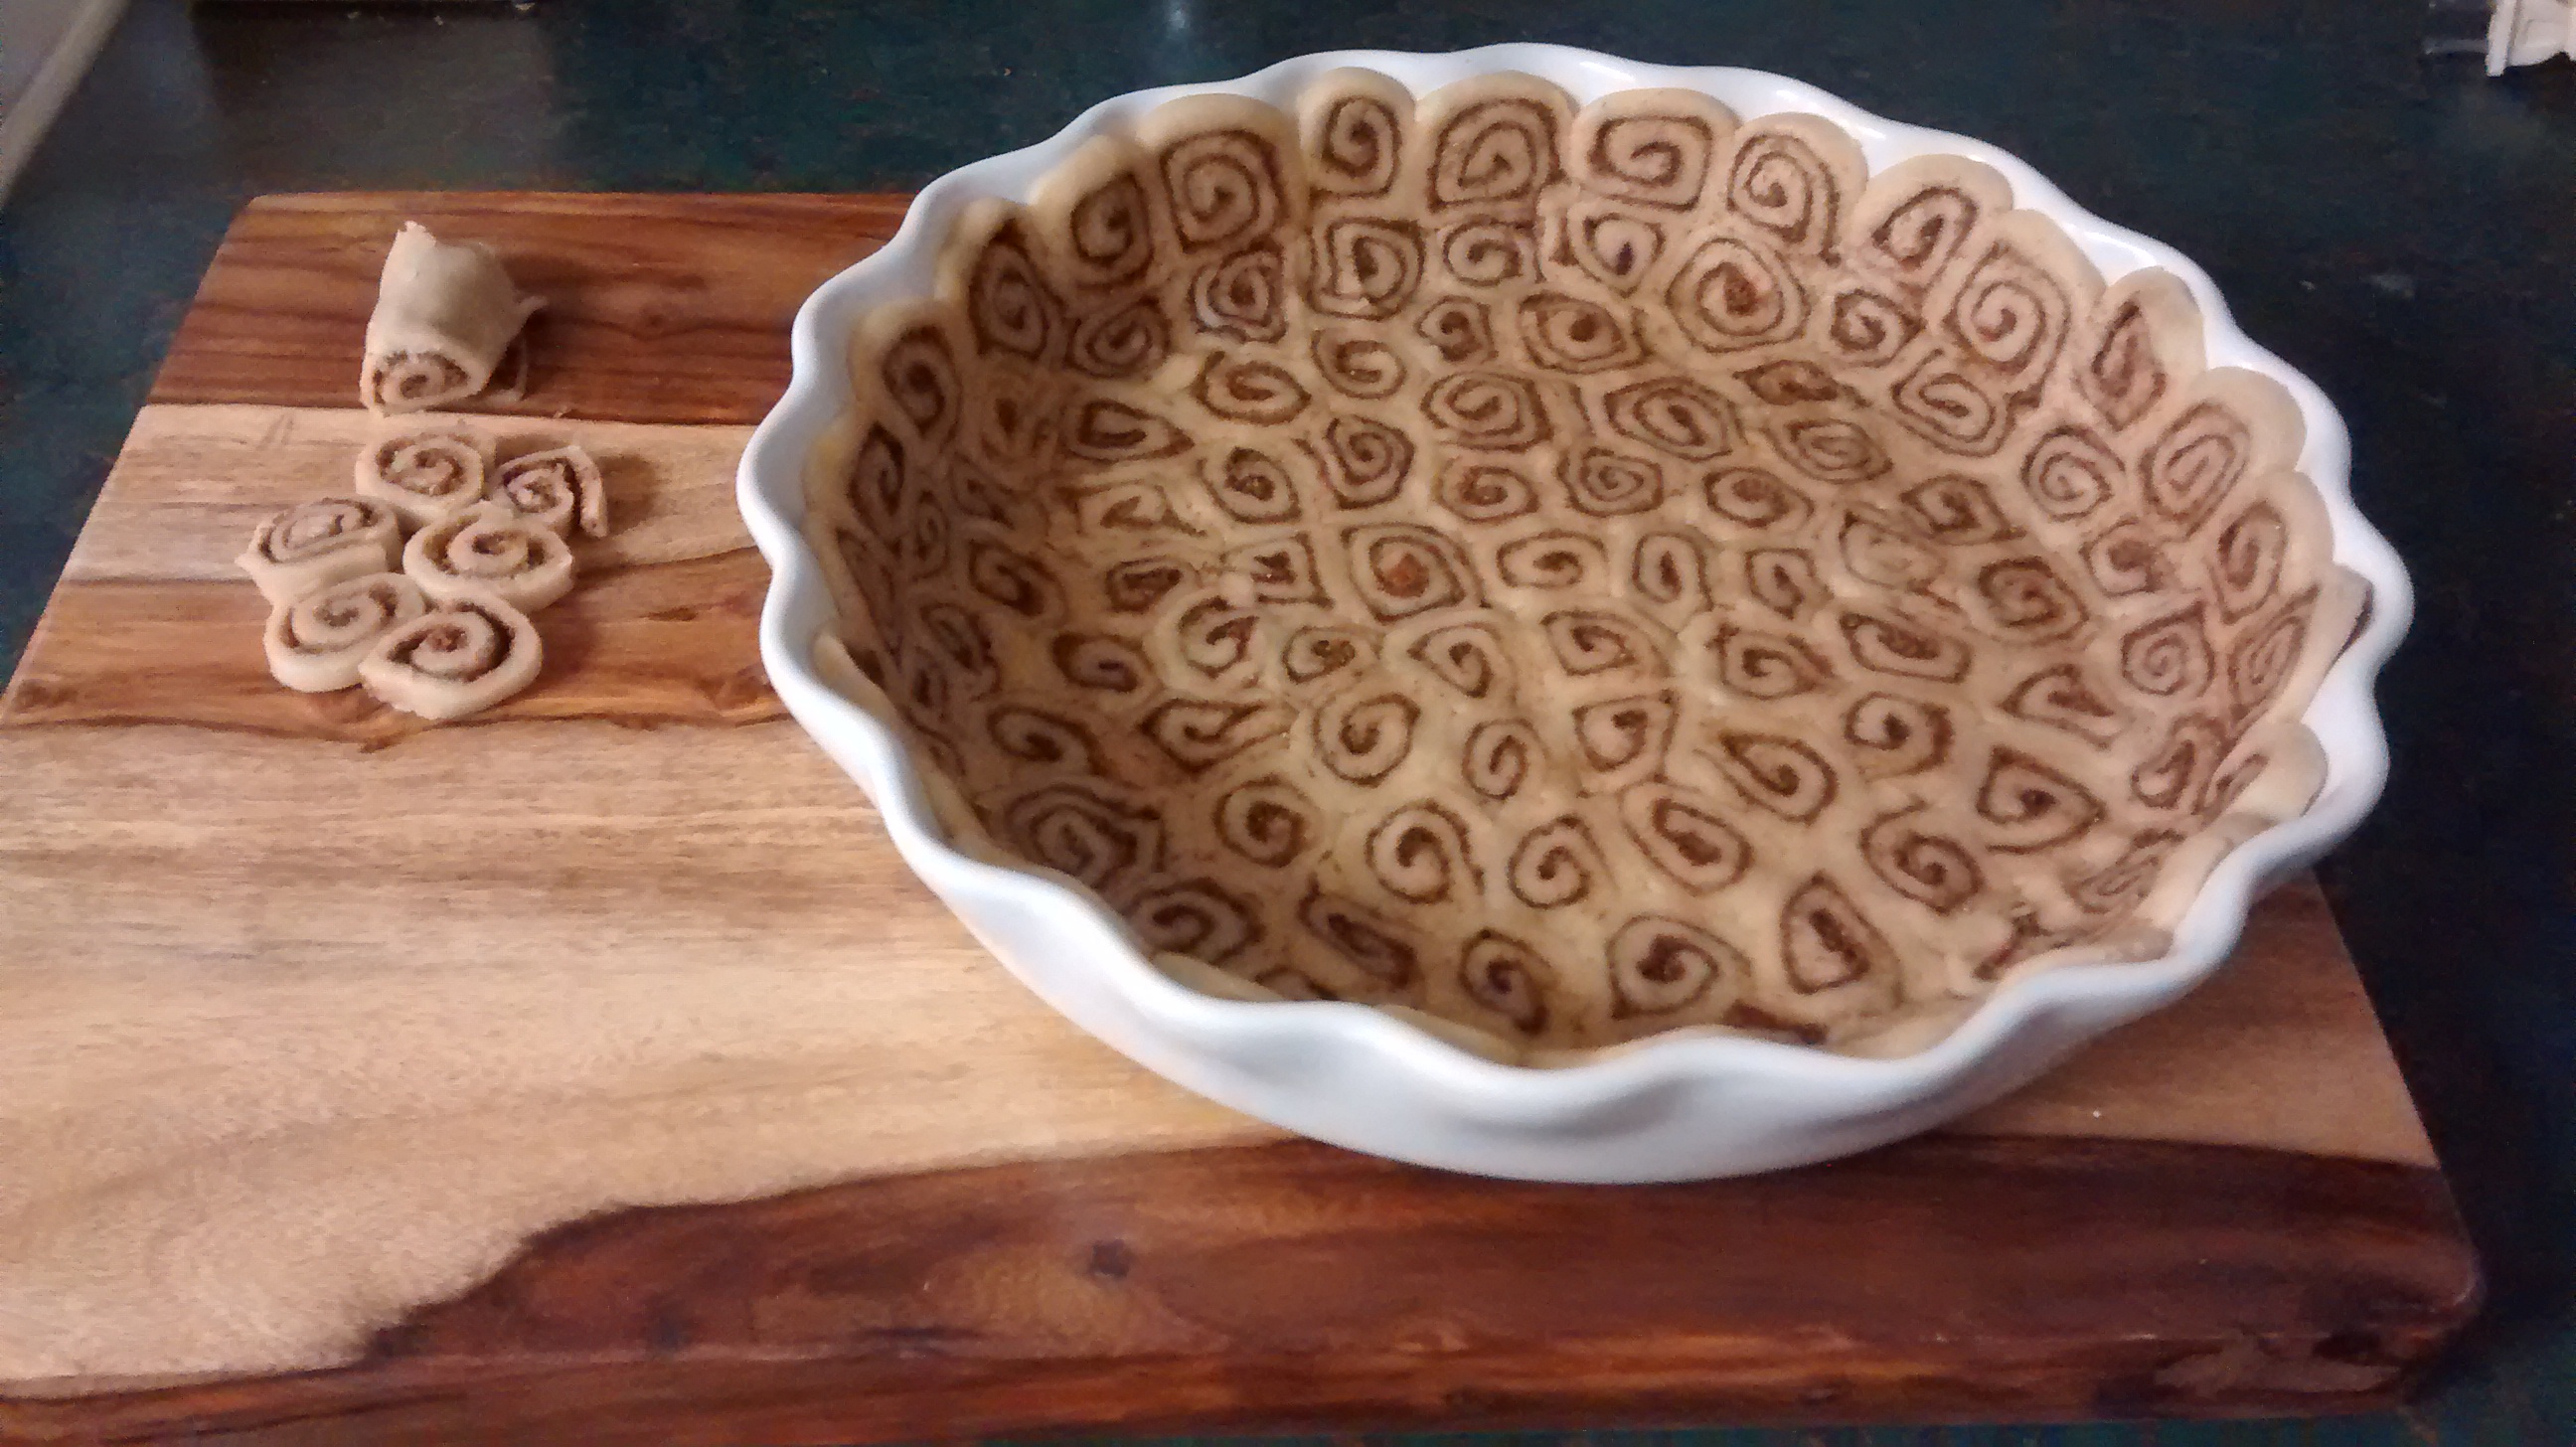 29 Images That Are Insanely Satisfying To Look At